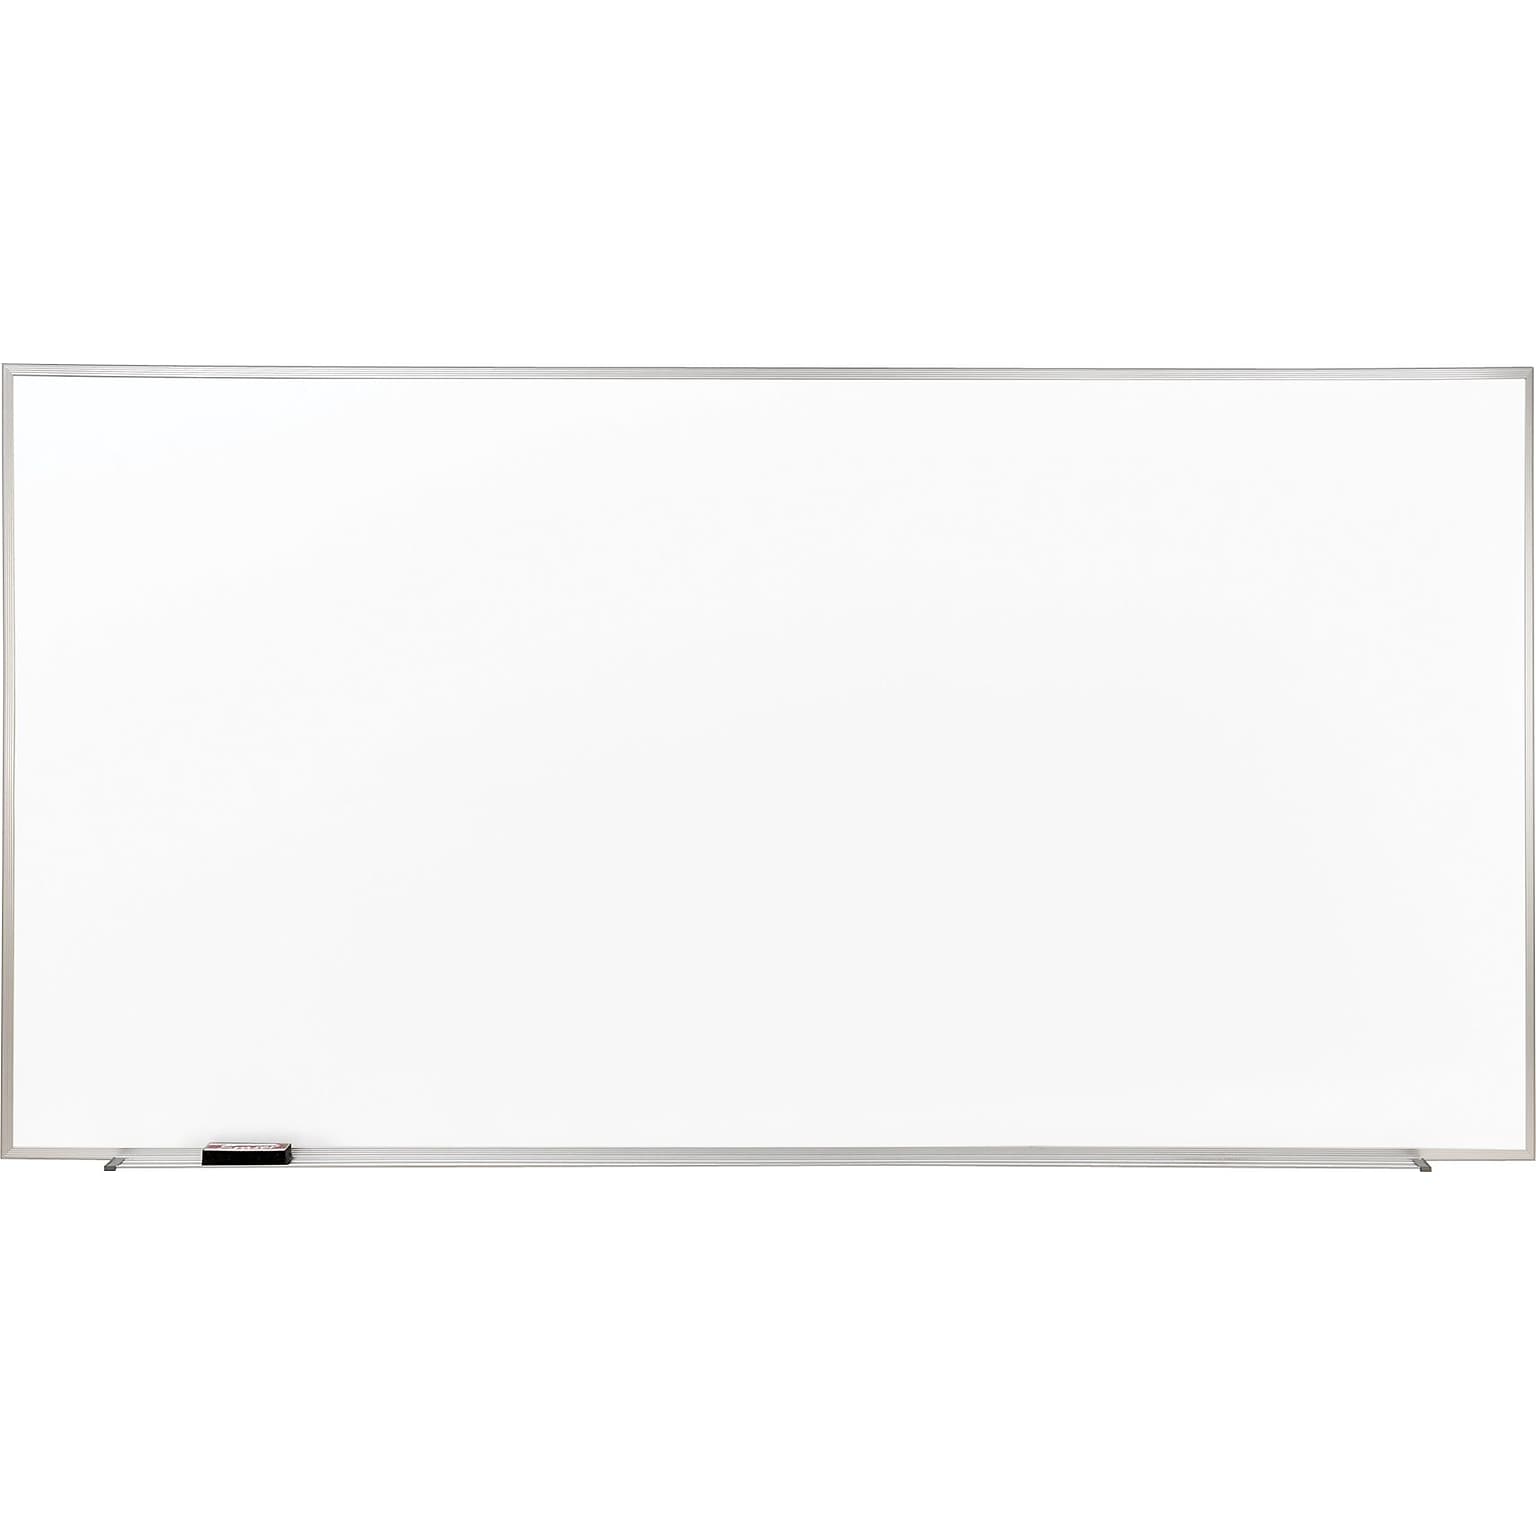 Ghent Non-Magnetic Whiteboard with Aluminum Frame, 4H x 12W (M2-412-4)